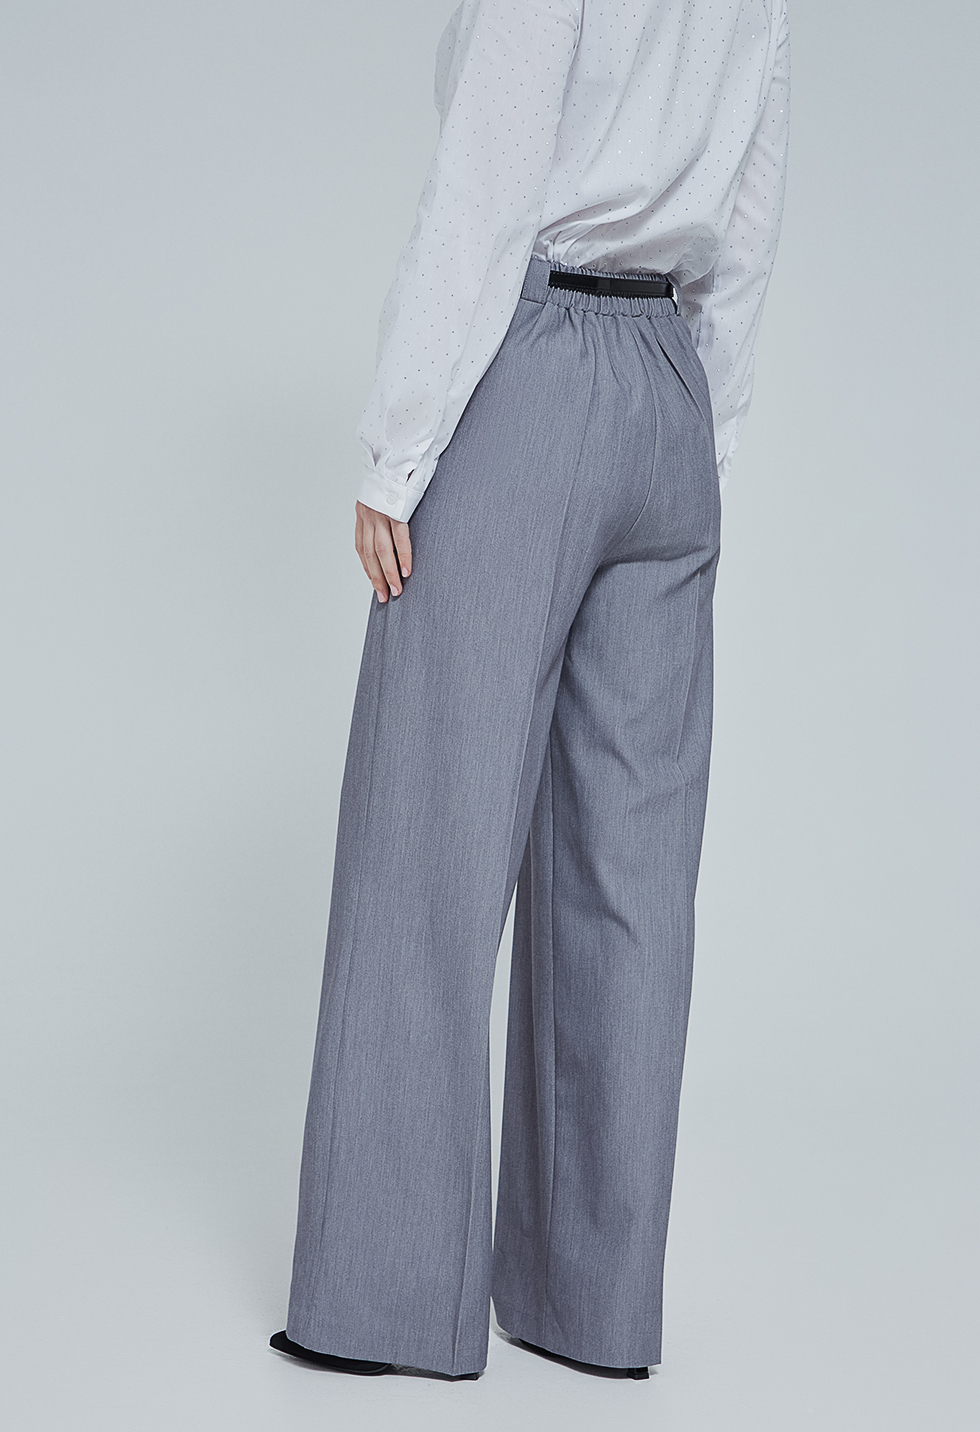 Straight-leg trousers with a belt.